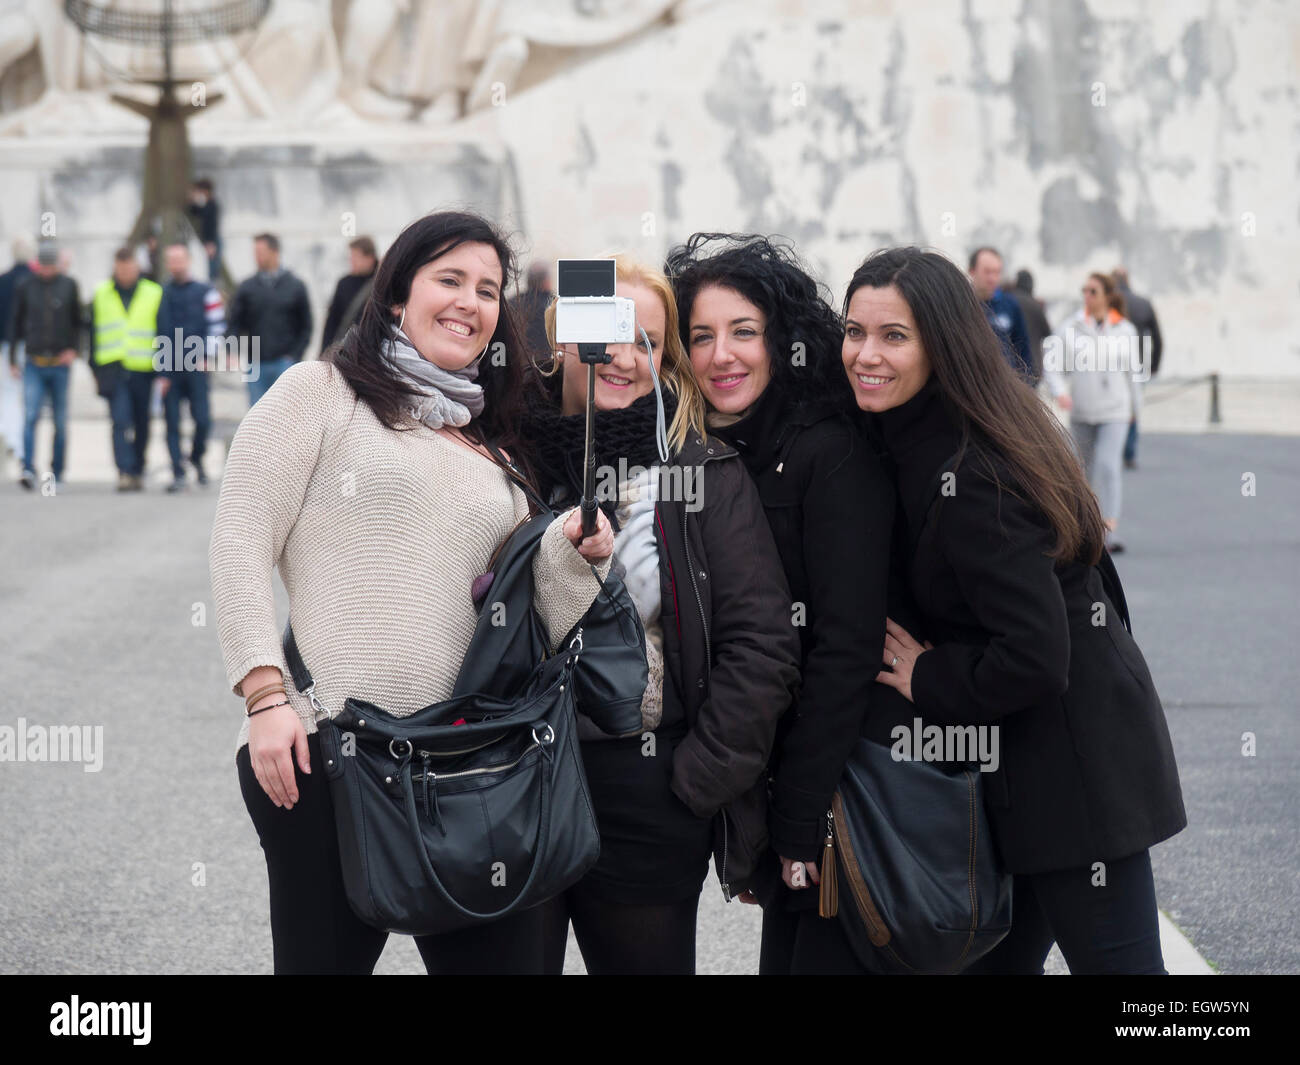 Group of teenage girls taking a selfie using a selfie stick Stock Photo